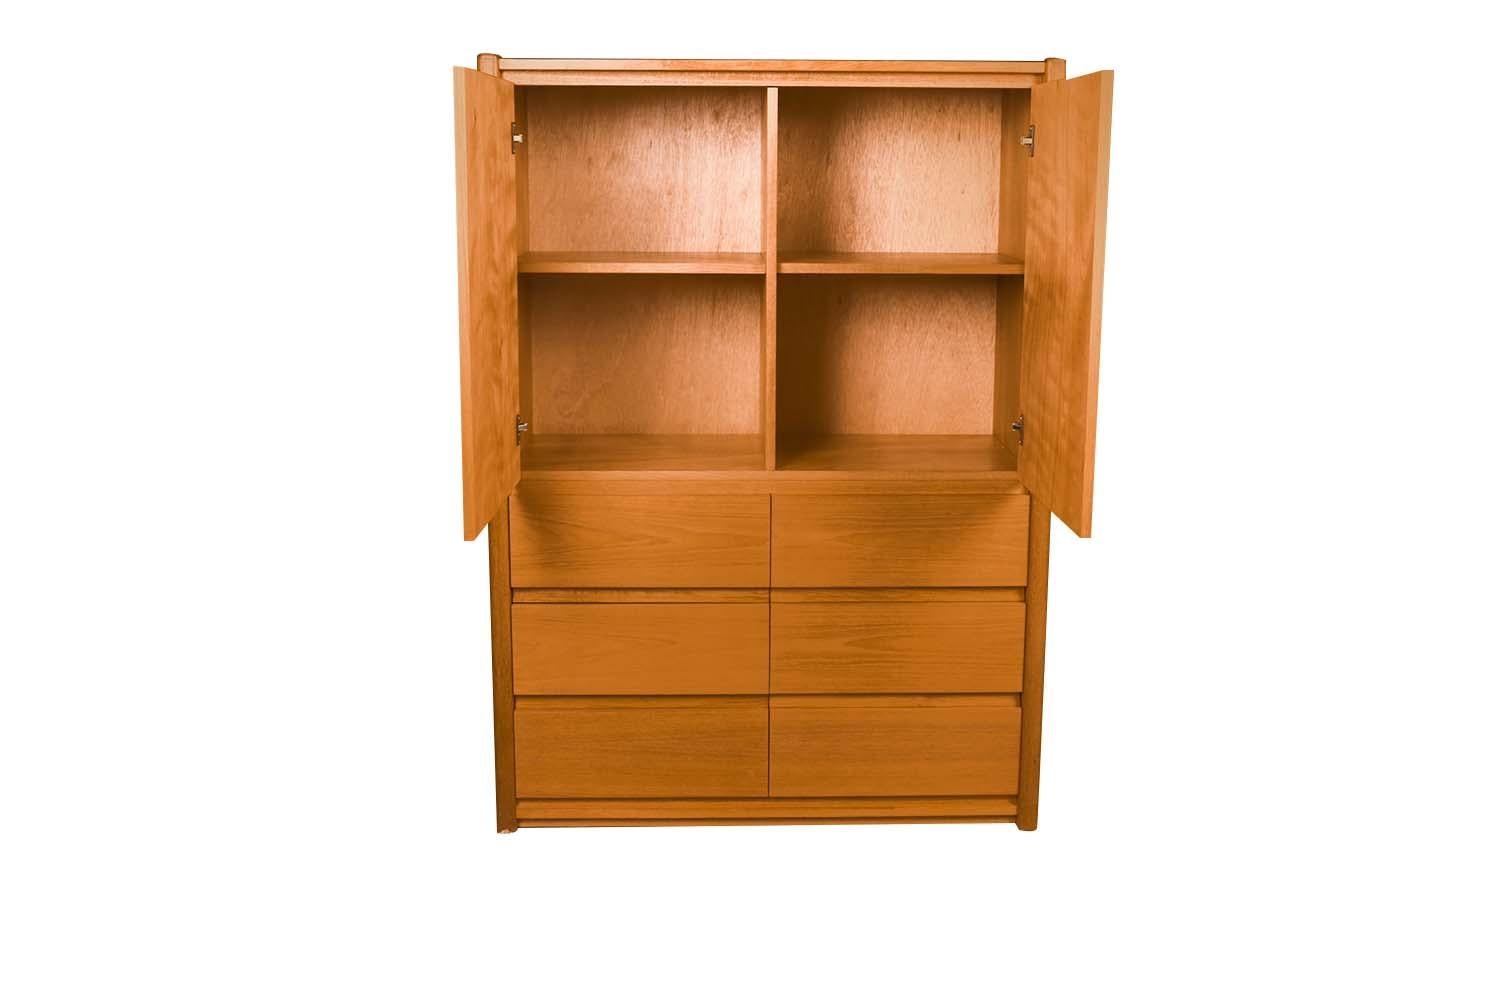 Vintage, midcentury teak double door cabinet. This stunning cabinet with its clean unadorned style is a beautiful example of modern furniture. Features an upper cabinet with double doors that open to reveal ample storage space with two removable